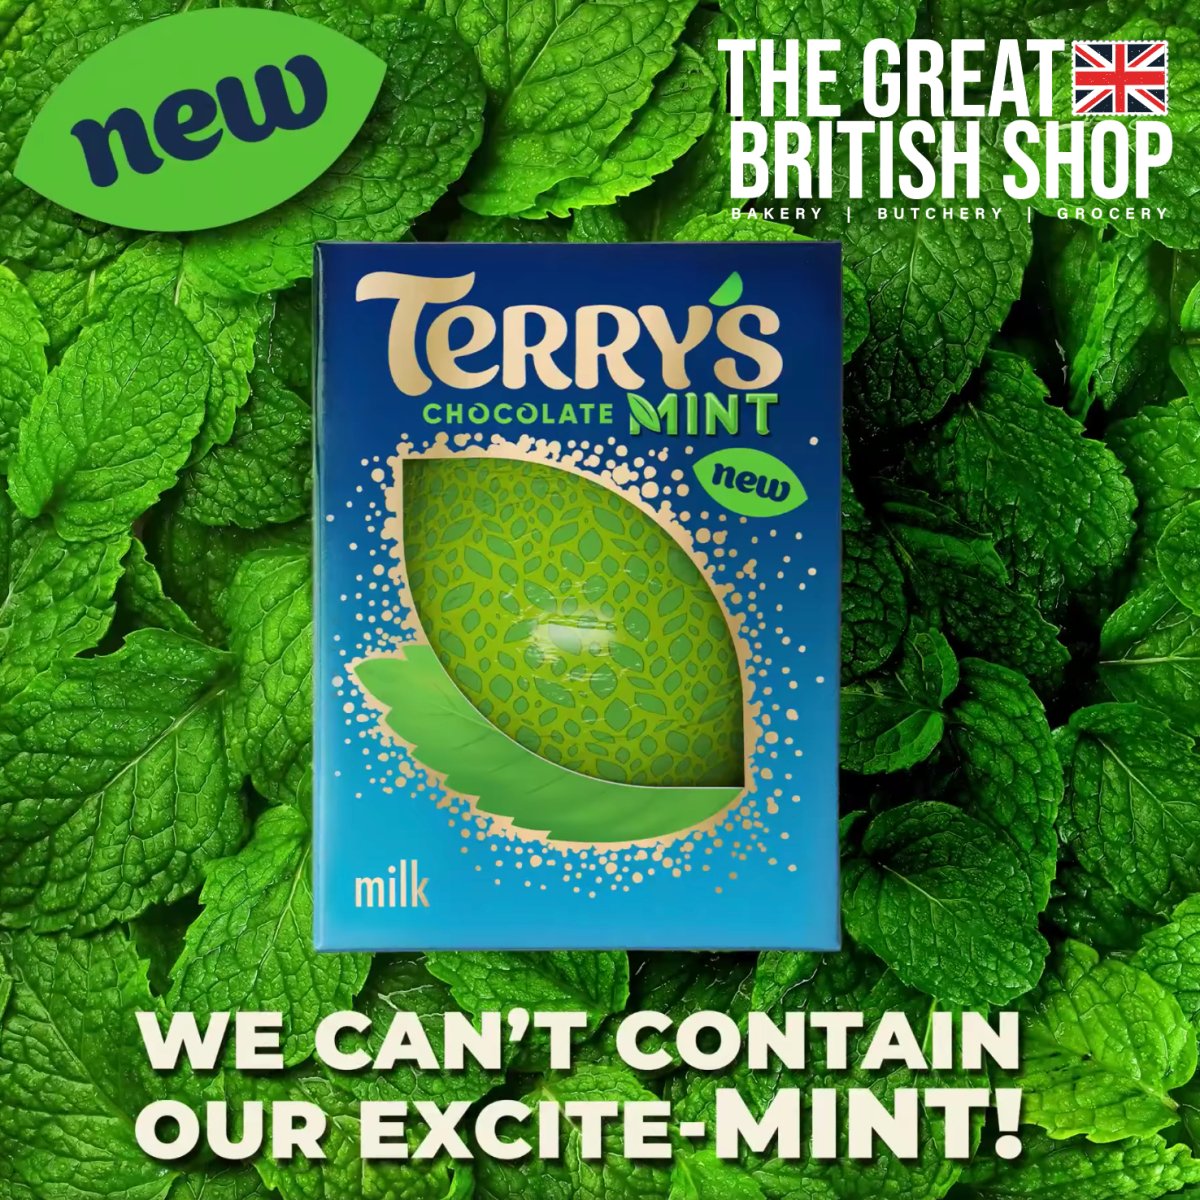 Terry's Chocolate Mint! - The Great British Shop